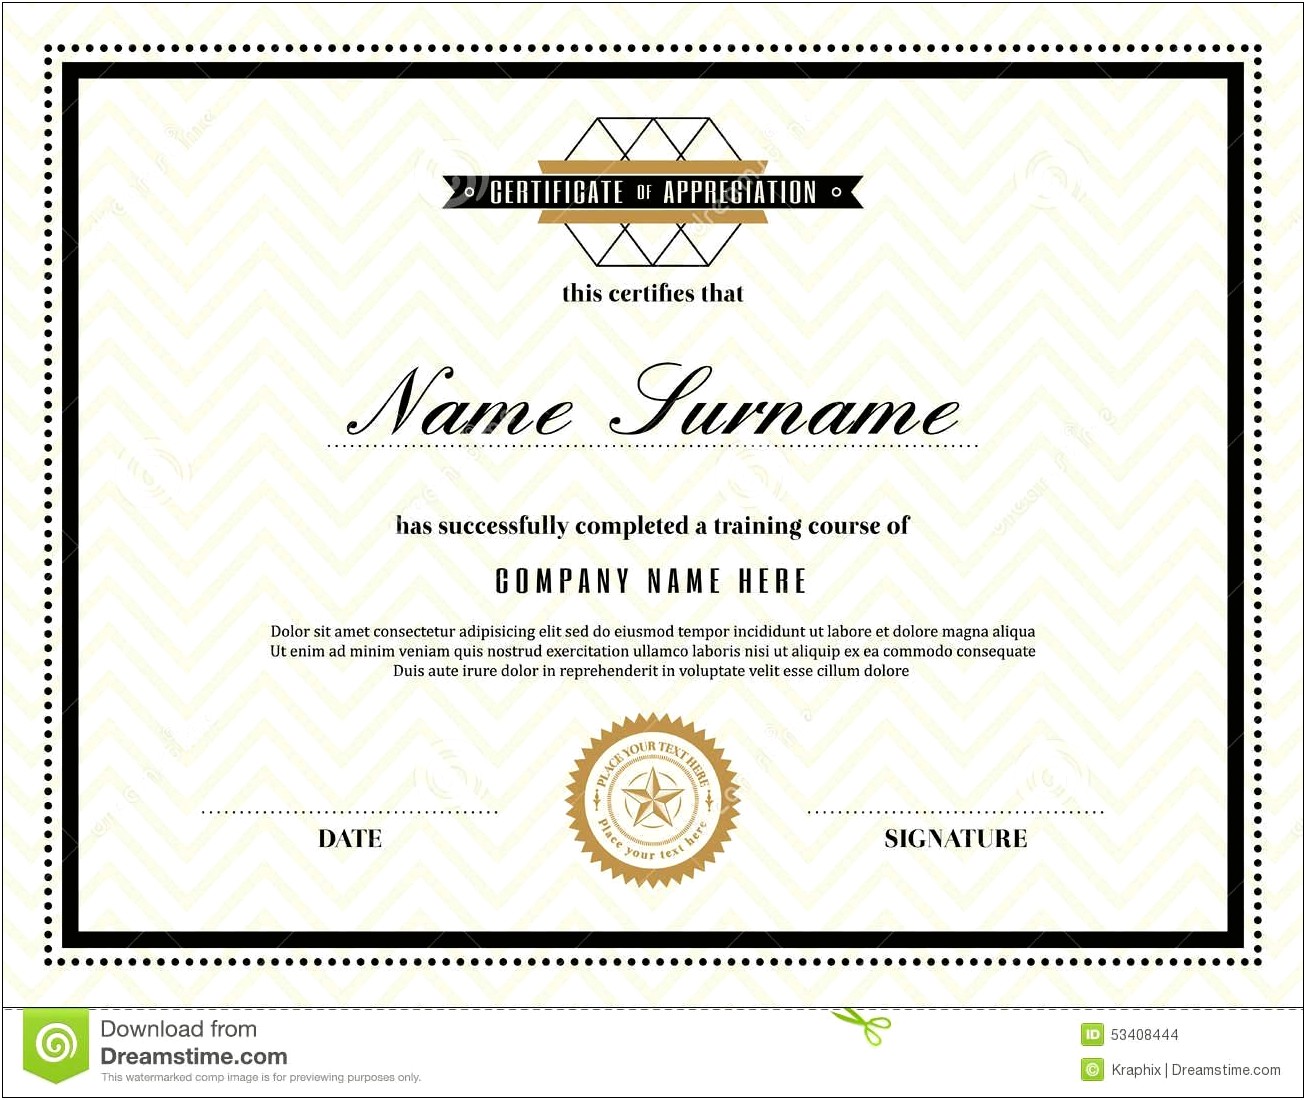 Free Printable Certificate Of Training Templates